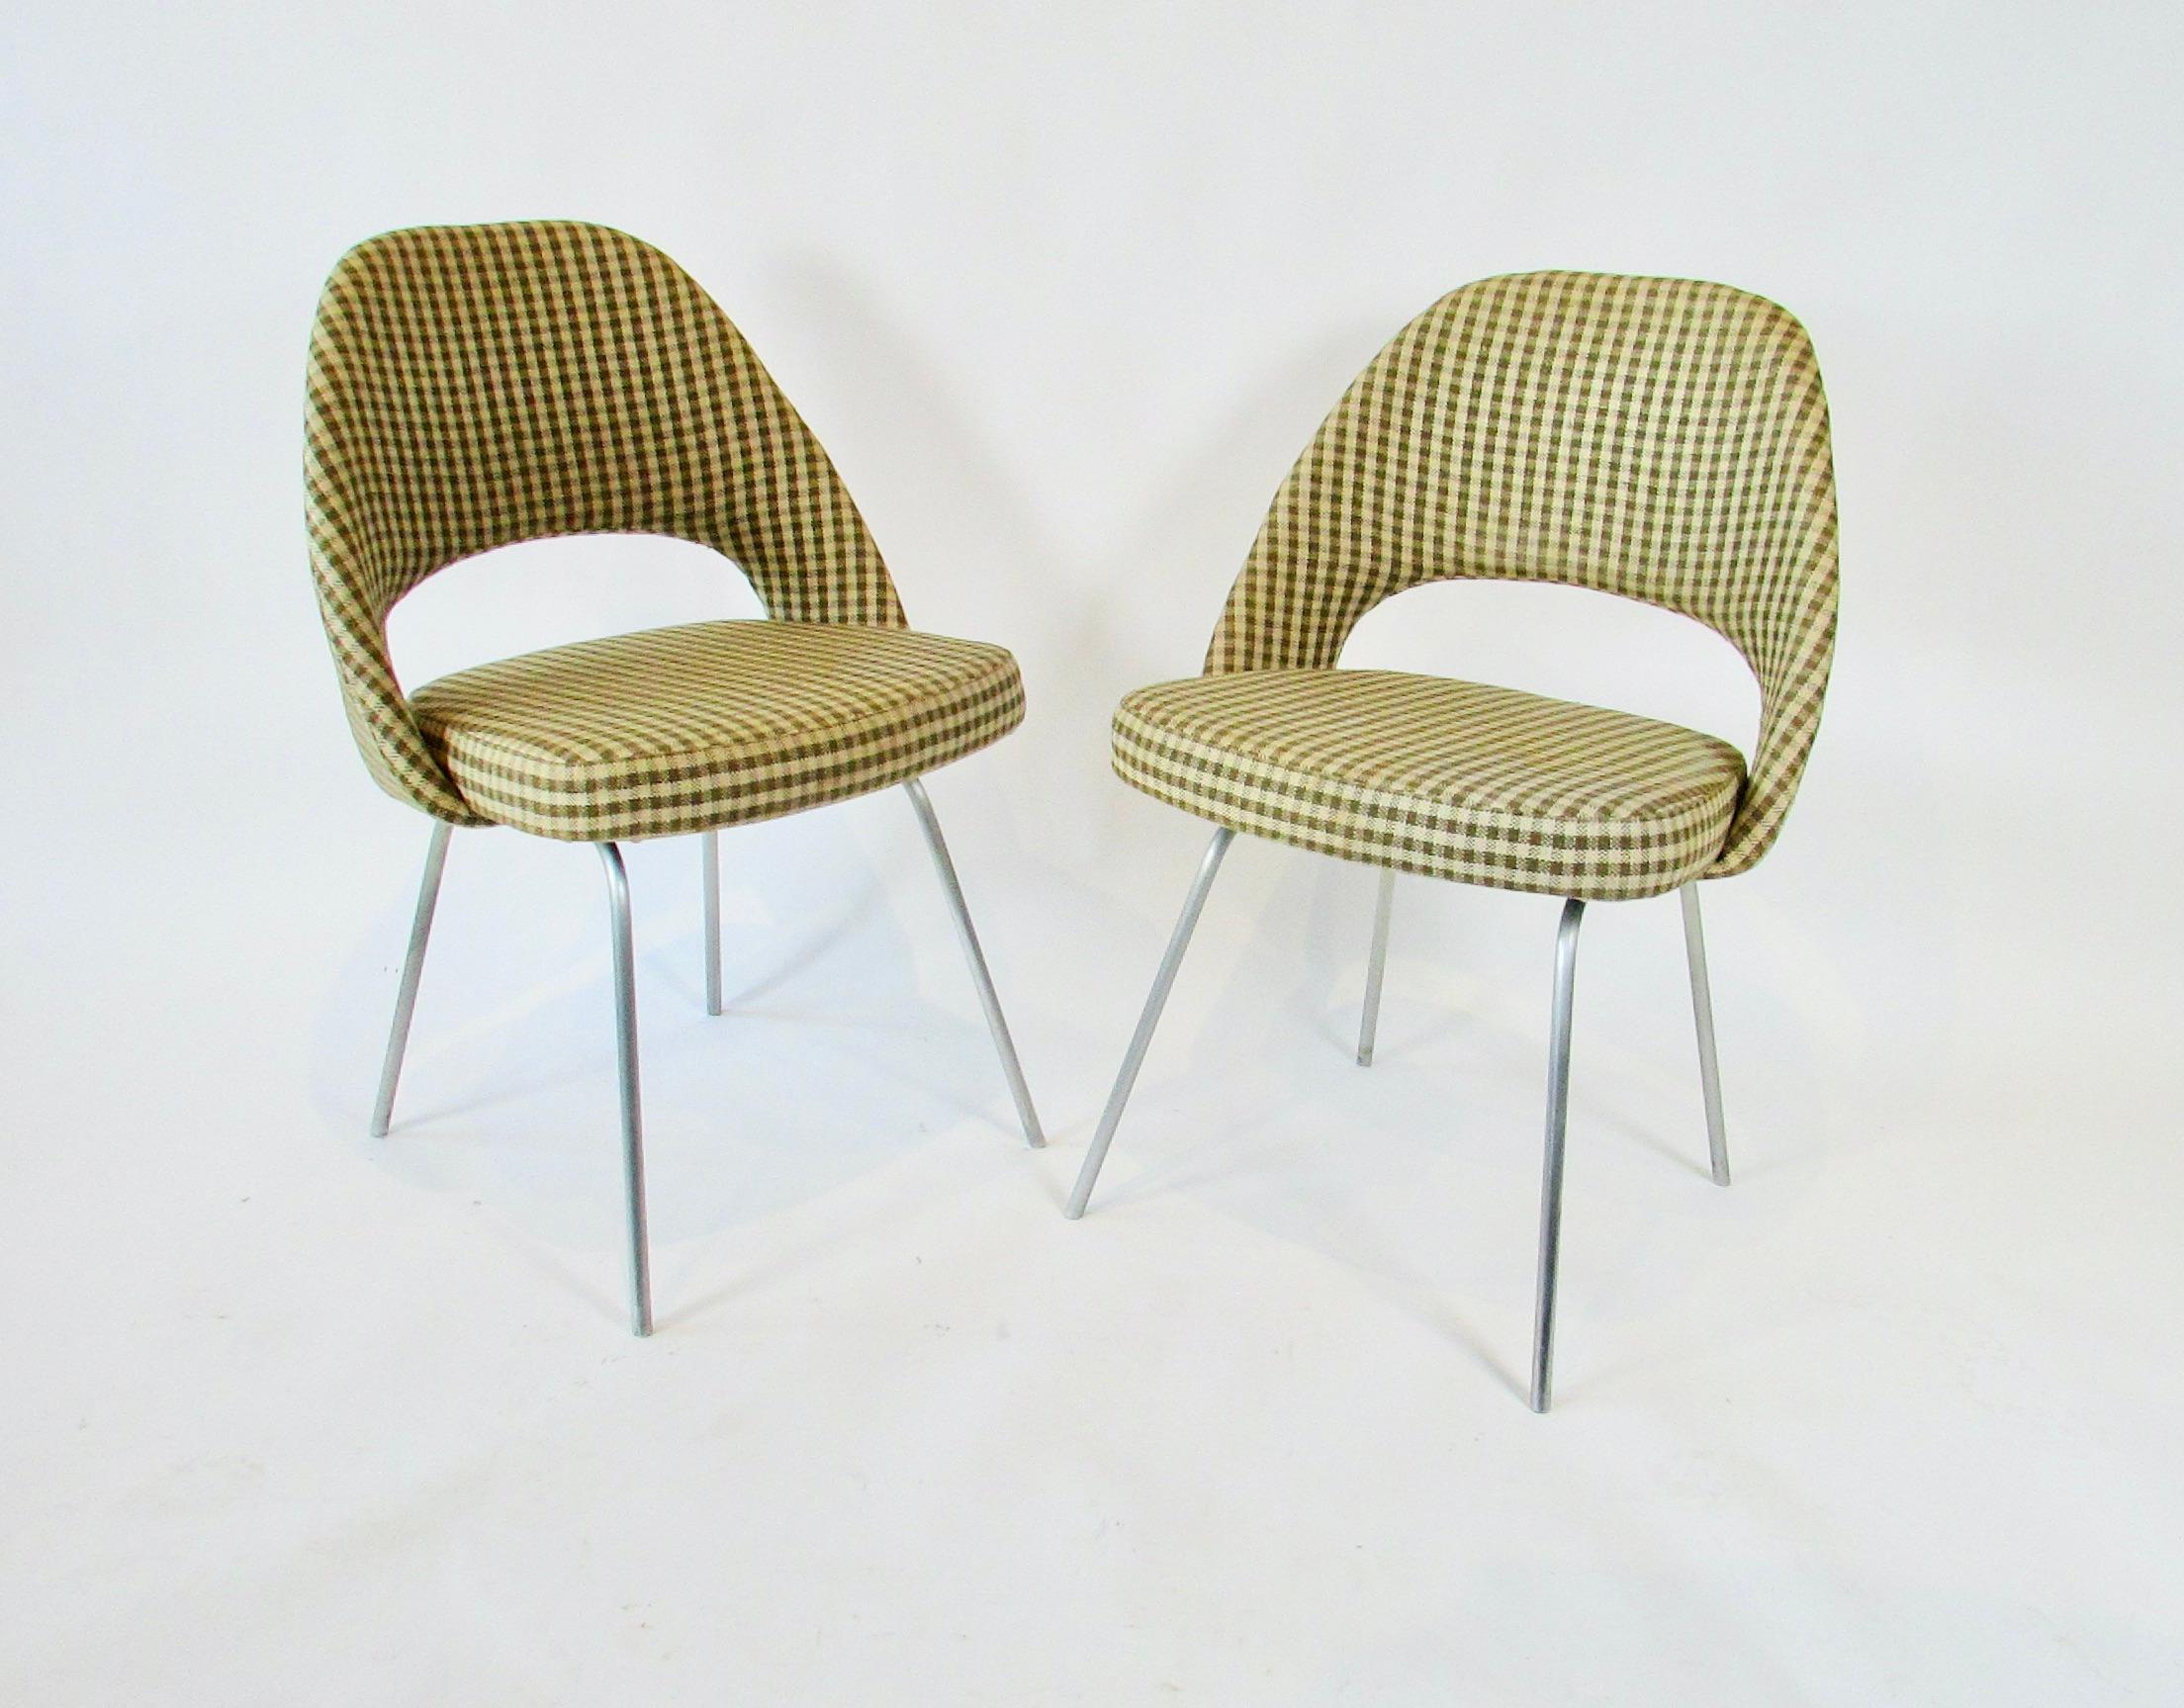 From the put me in a museum collection. Out of long long term storage. The Earliest production set of four Eero Saarinen for HG Knoll executive chairs I have ever seen. All four on first generation one piece base. One chair has welded steel with